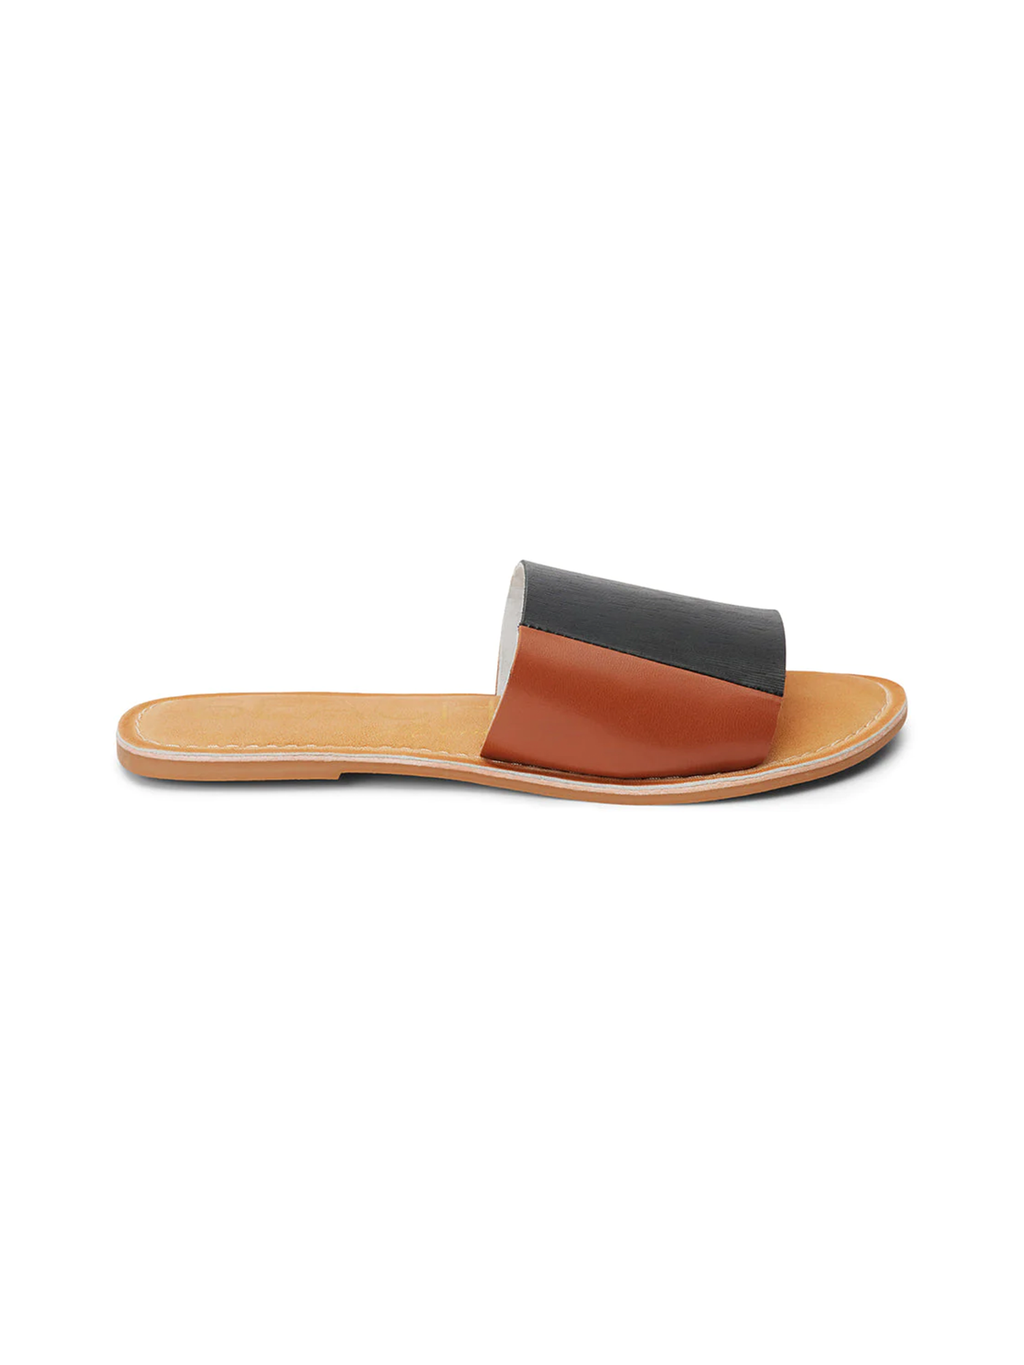 Bonfire Leather Slide - Stitch And Feather